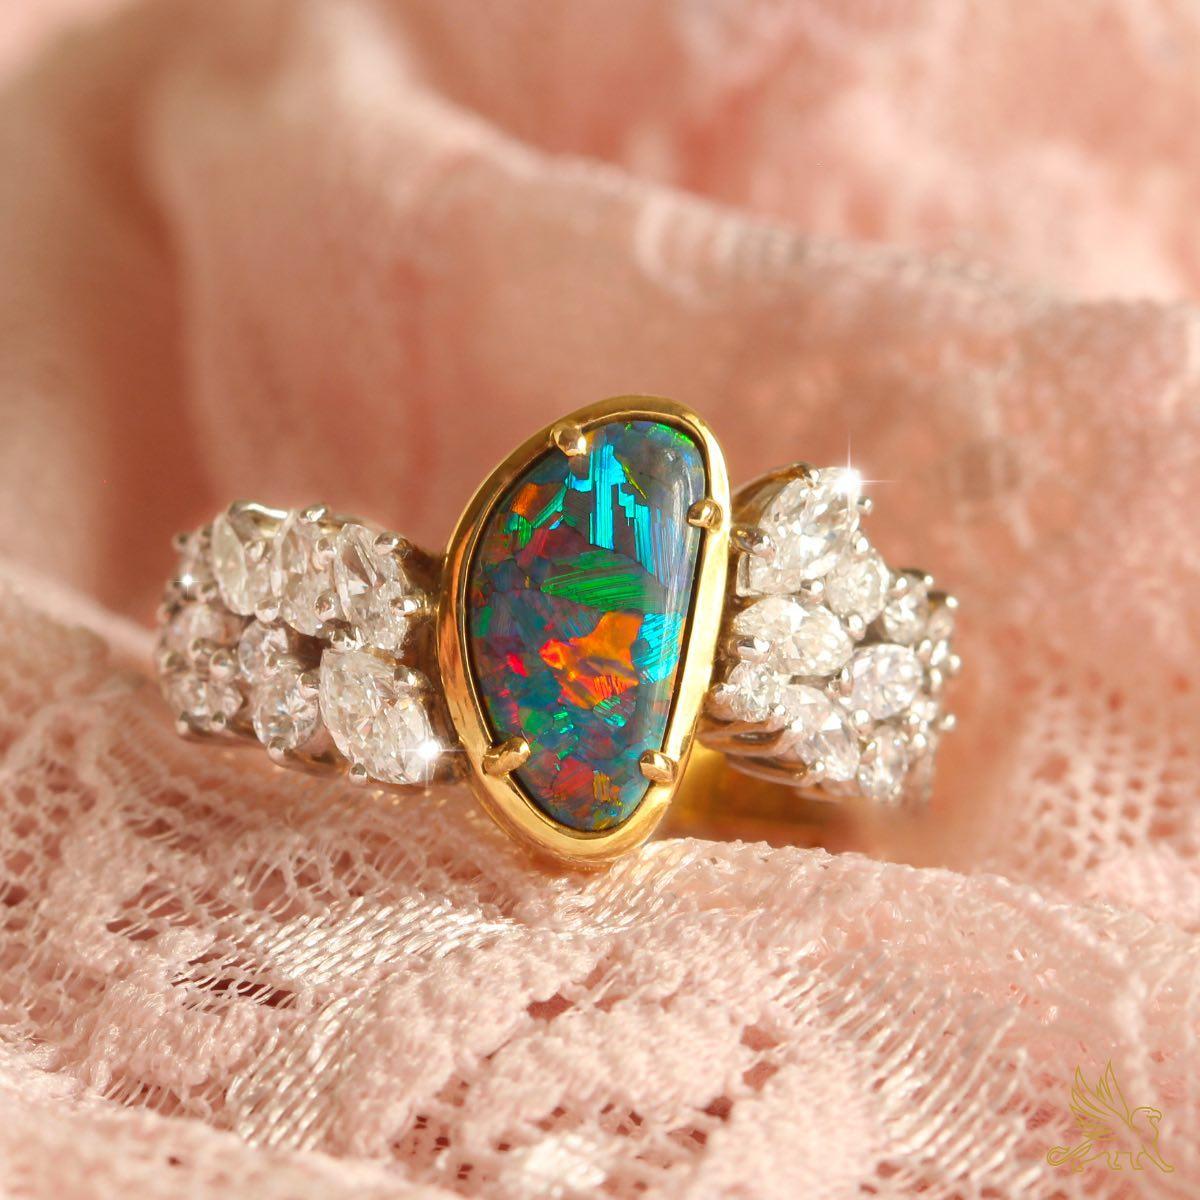 When words are not enough, this ring says it all. Such an amazingly beautiful Solid Black Opal set in 18K gold and with over 1.2ct of high jewellery grade brilliant white diamonds, this is a ring fit for a Princess. The rare pattern and vivid